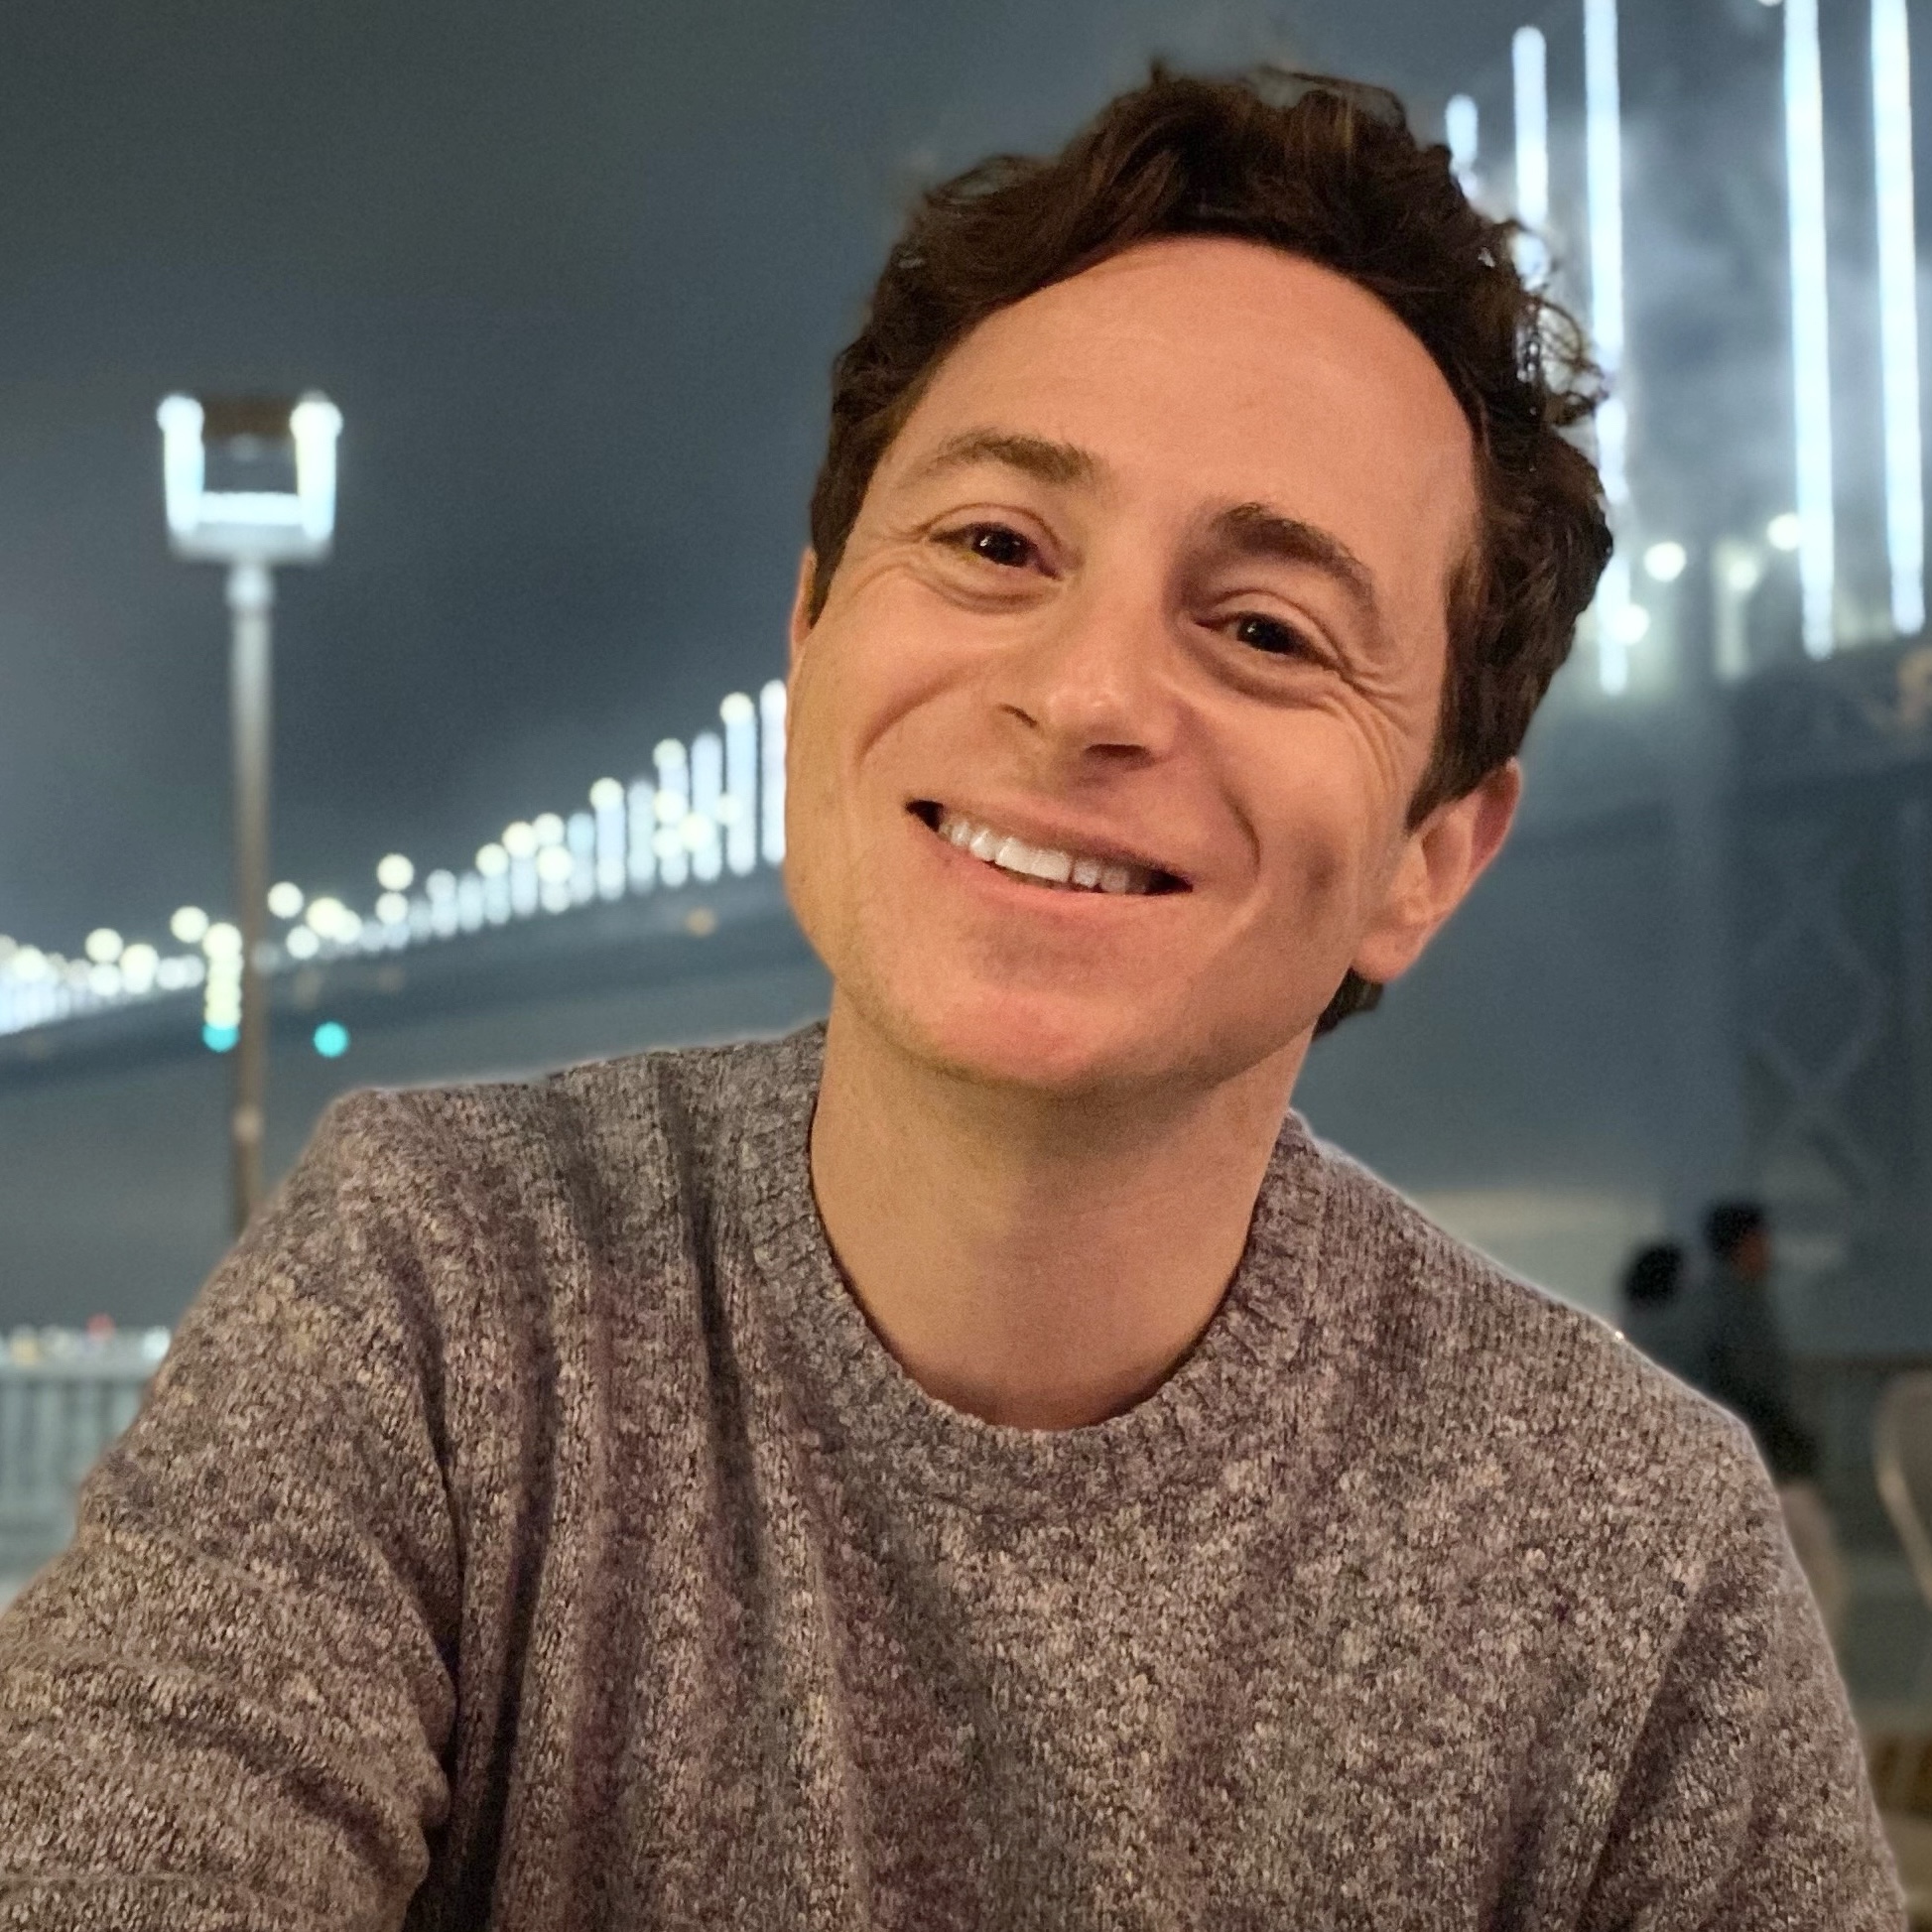 A person smiling at the camera with short wavy brown hair and a heather grey sweater sitting in front of a bridge with bright lights at night.